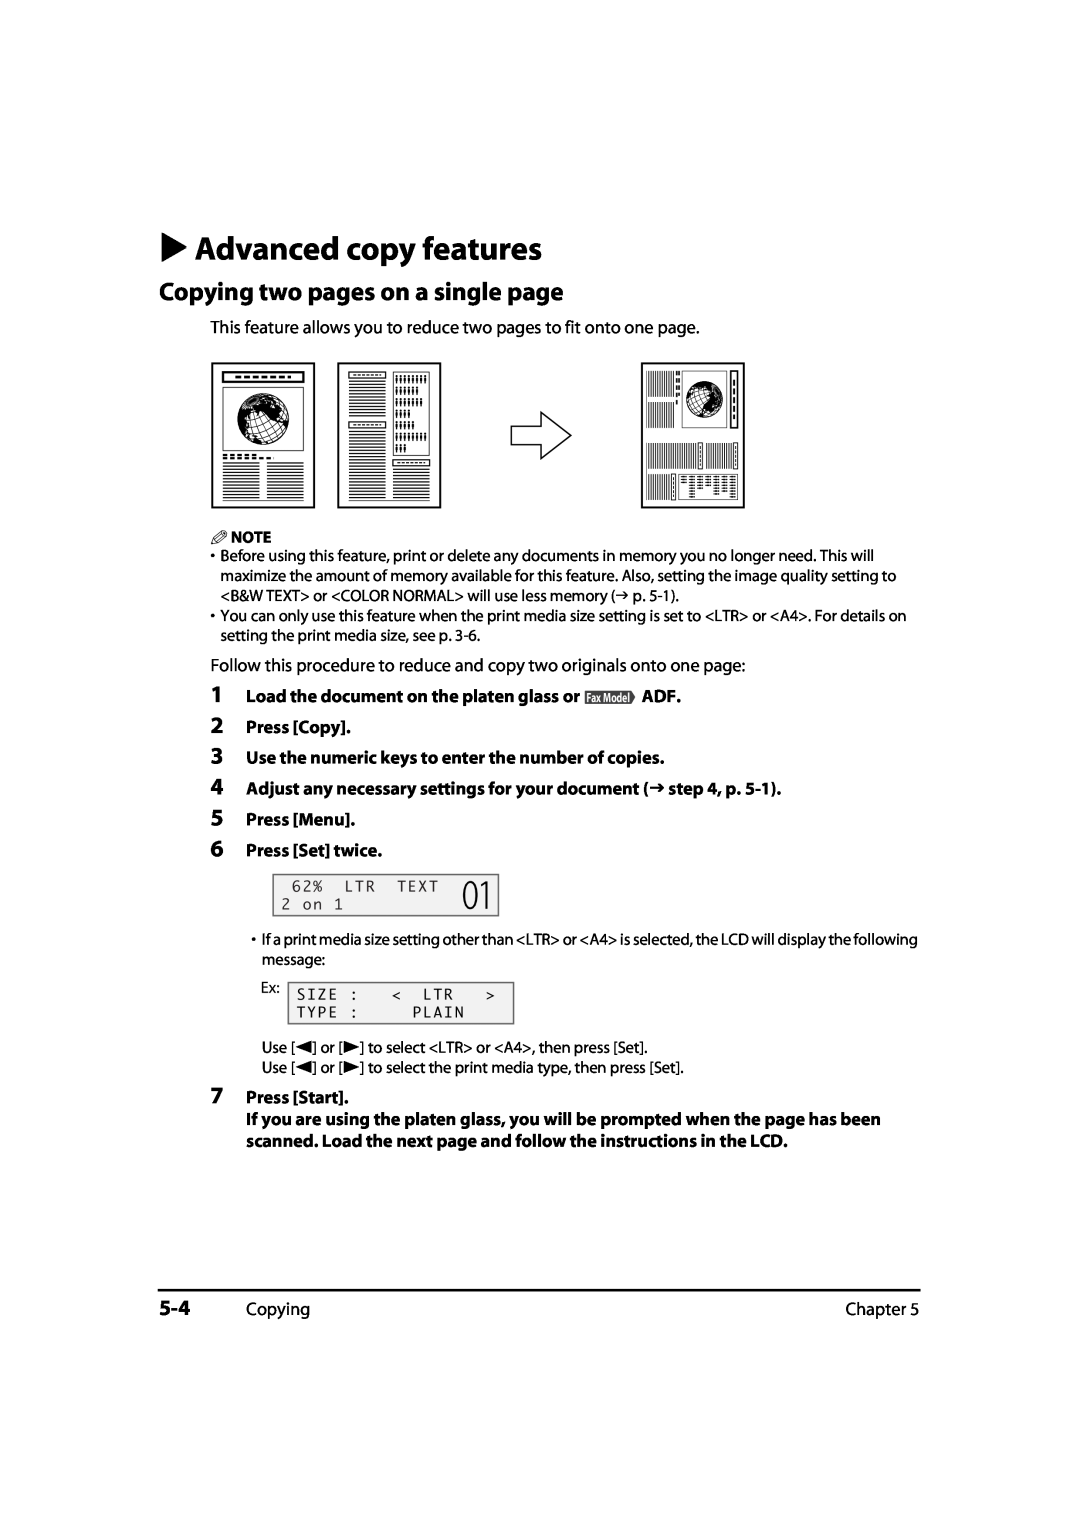 Canon MultiPASS MP730, 730i, MP700 Advanced copy features, Copying two pages on a single page, Press Menu 6 Press Set twice 